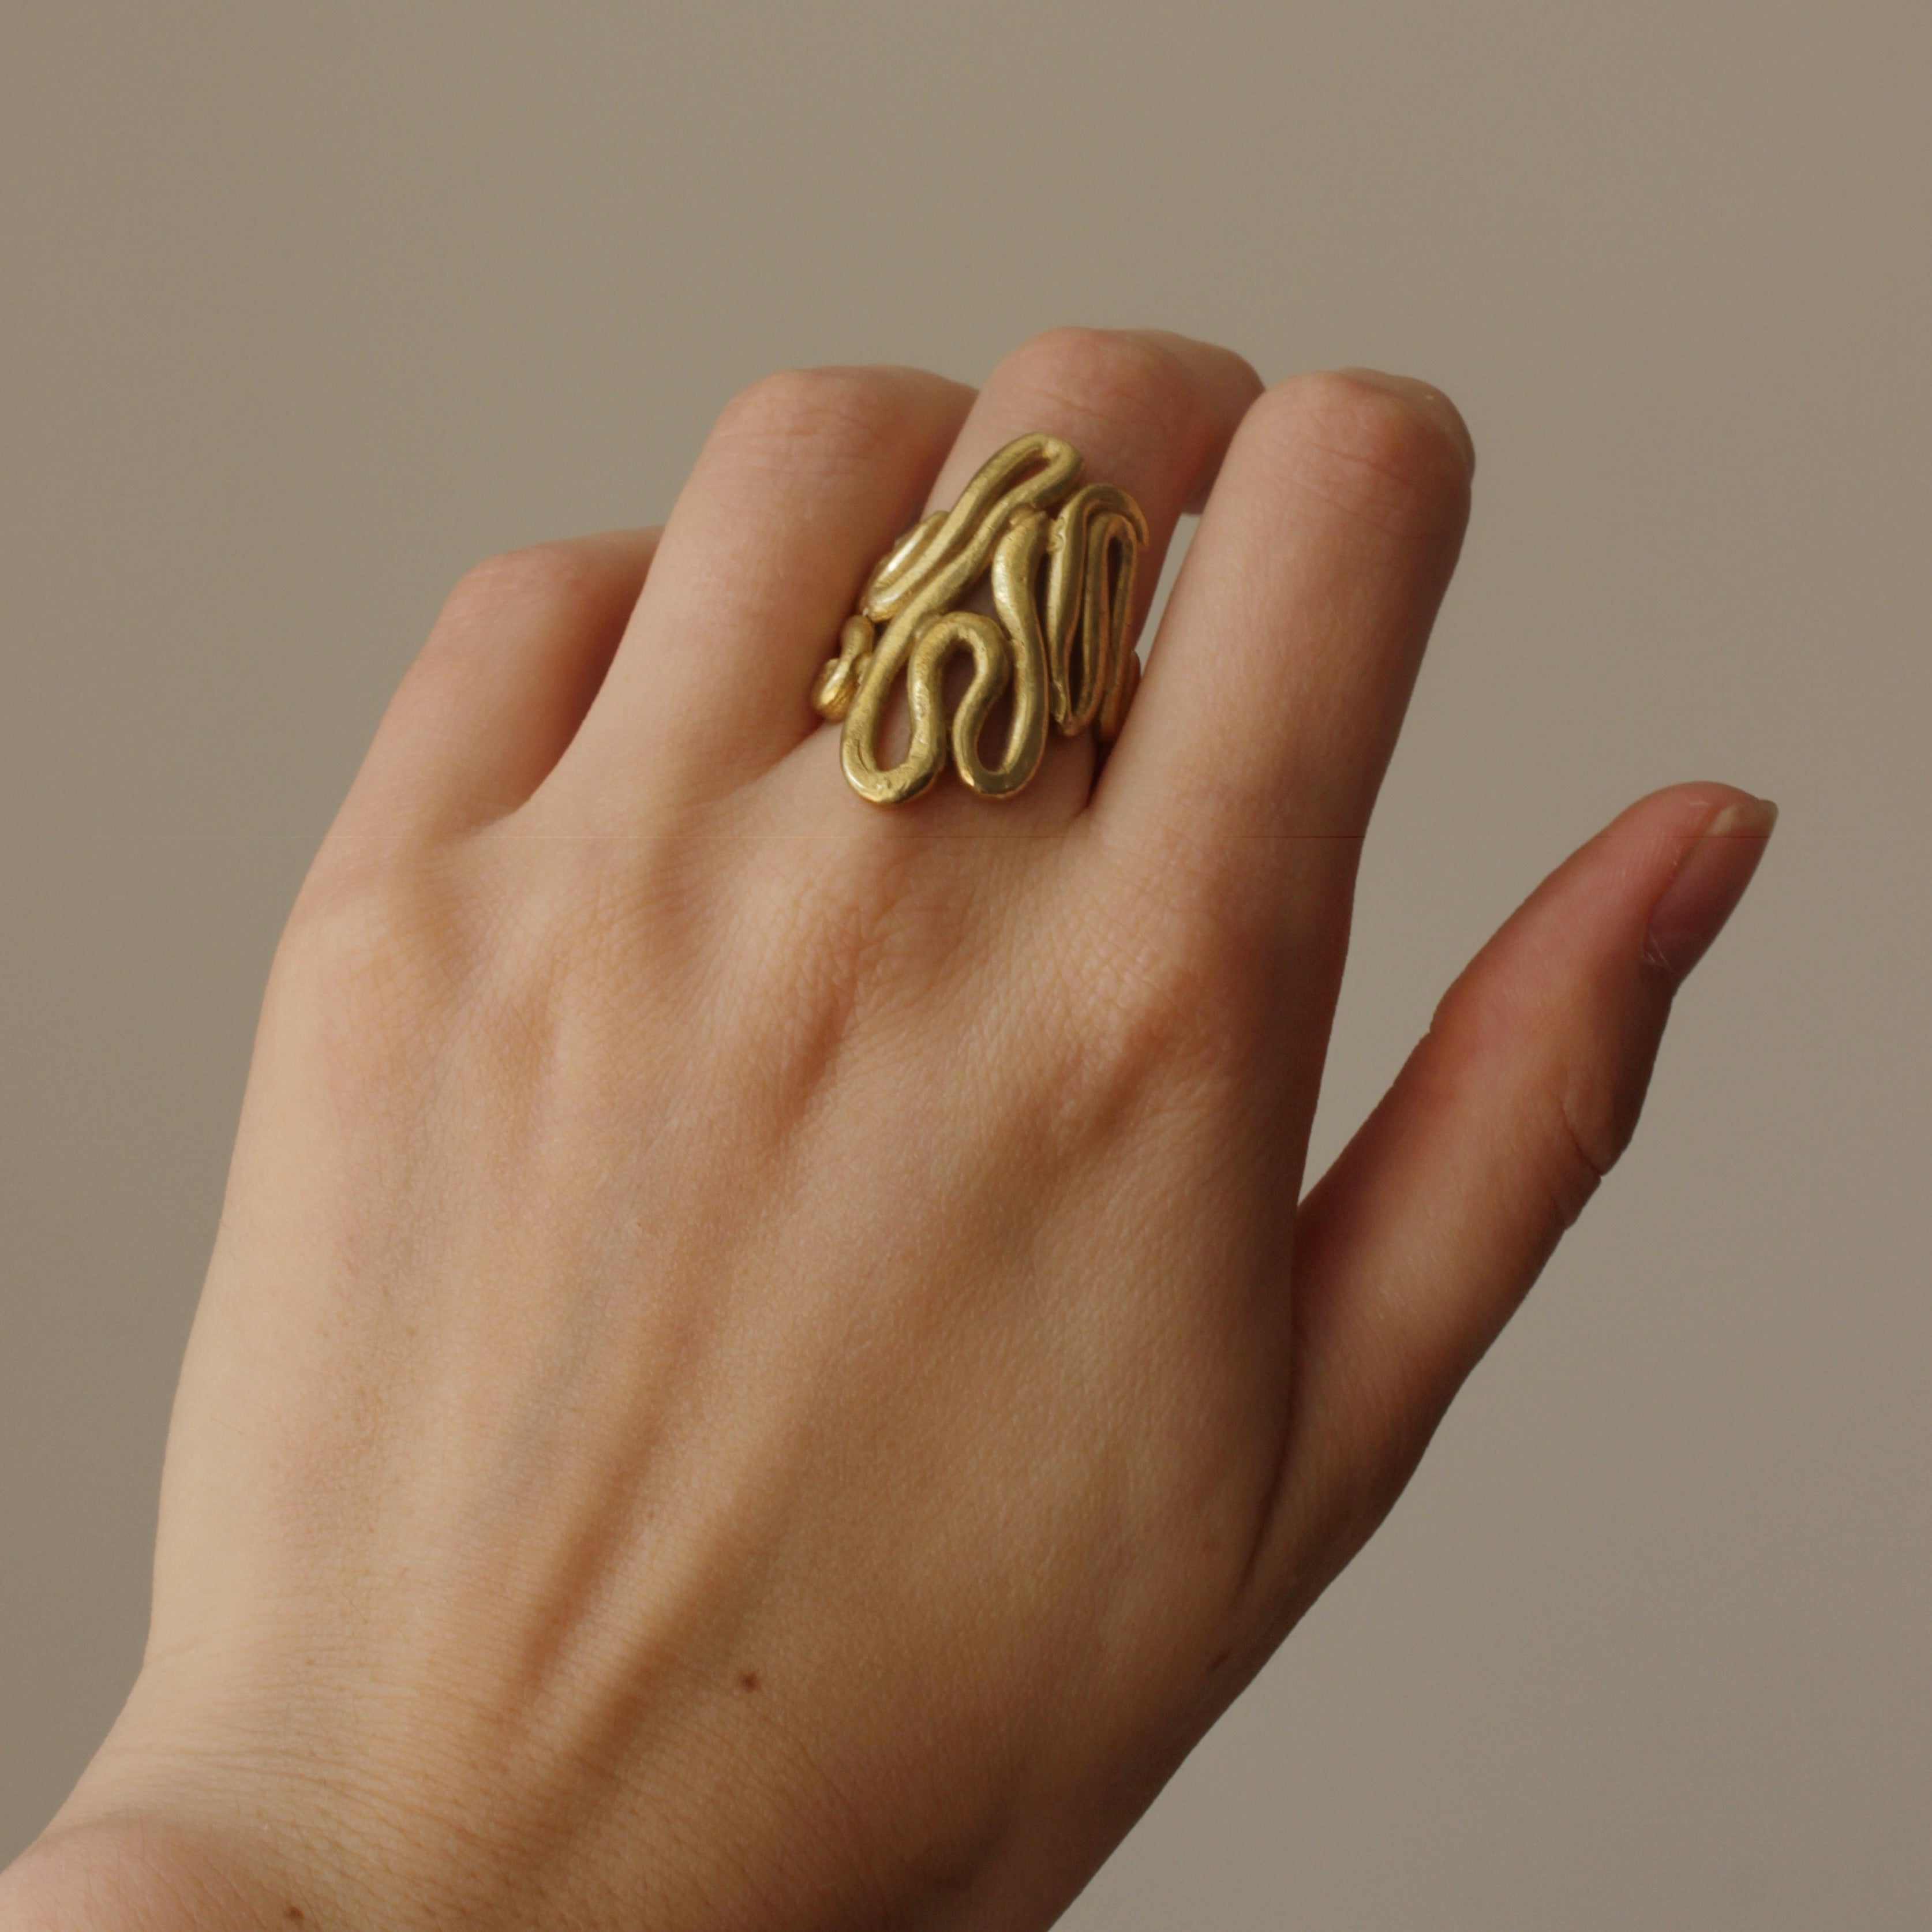 The one-of-a-kind Medusa ring has been handcrafted in  brass, detailing fingerprints and intricate twists and turns. Inspired by Medusa, the figure from Greek mythology and acting as a symbol to ward off evil and negativity.